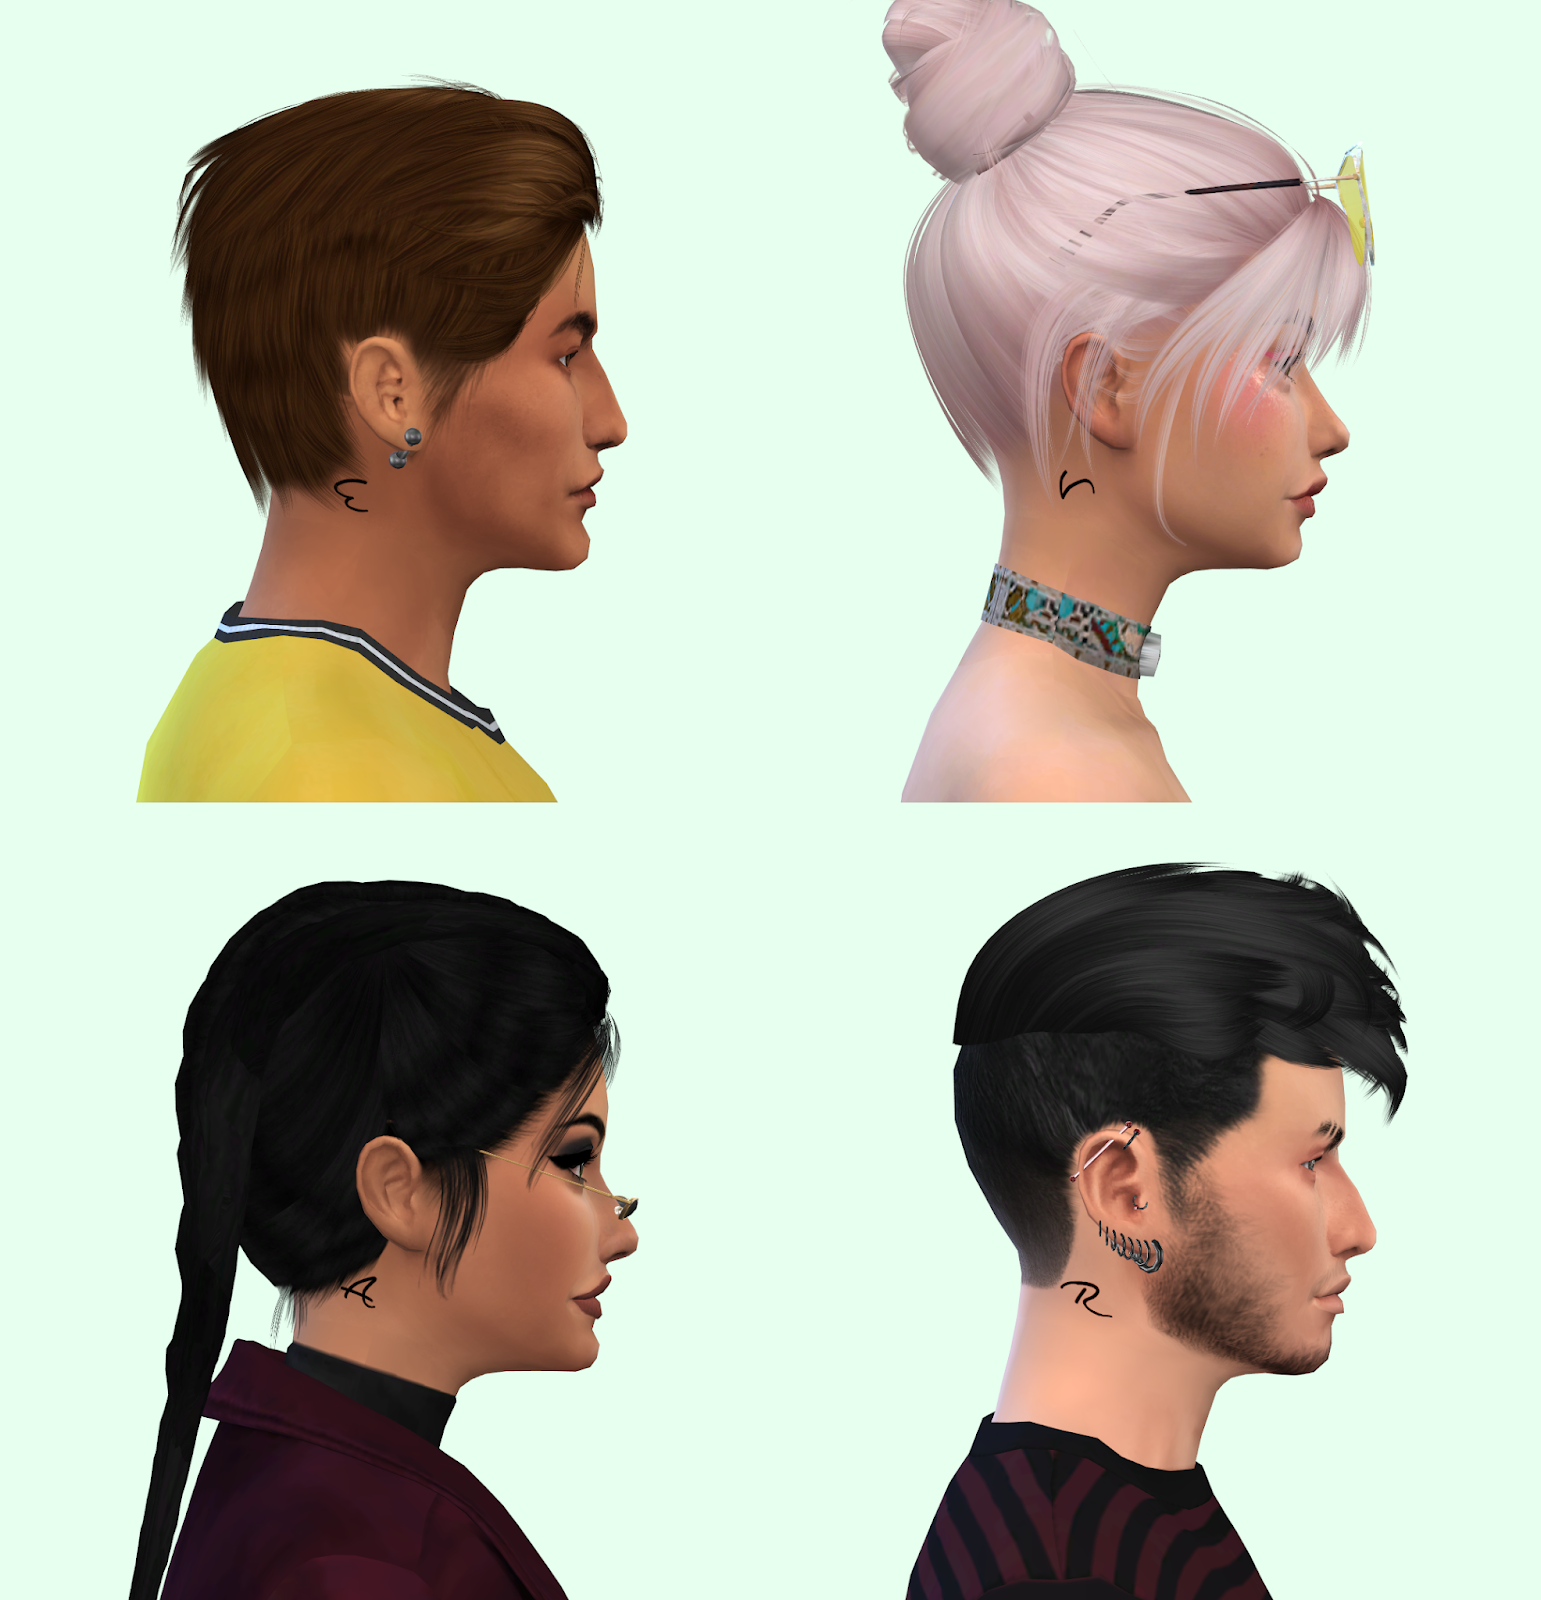 The Sims 4 Downloads for everyone! 